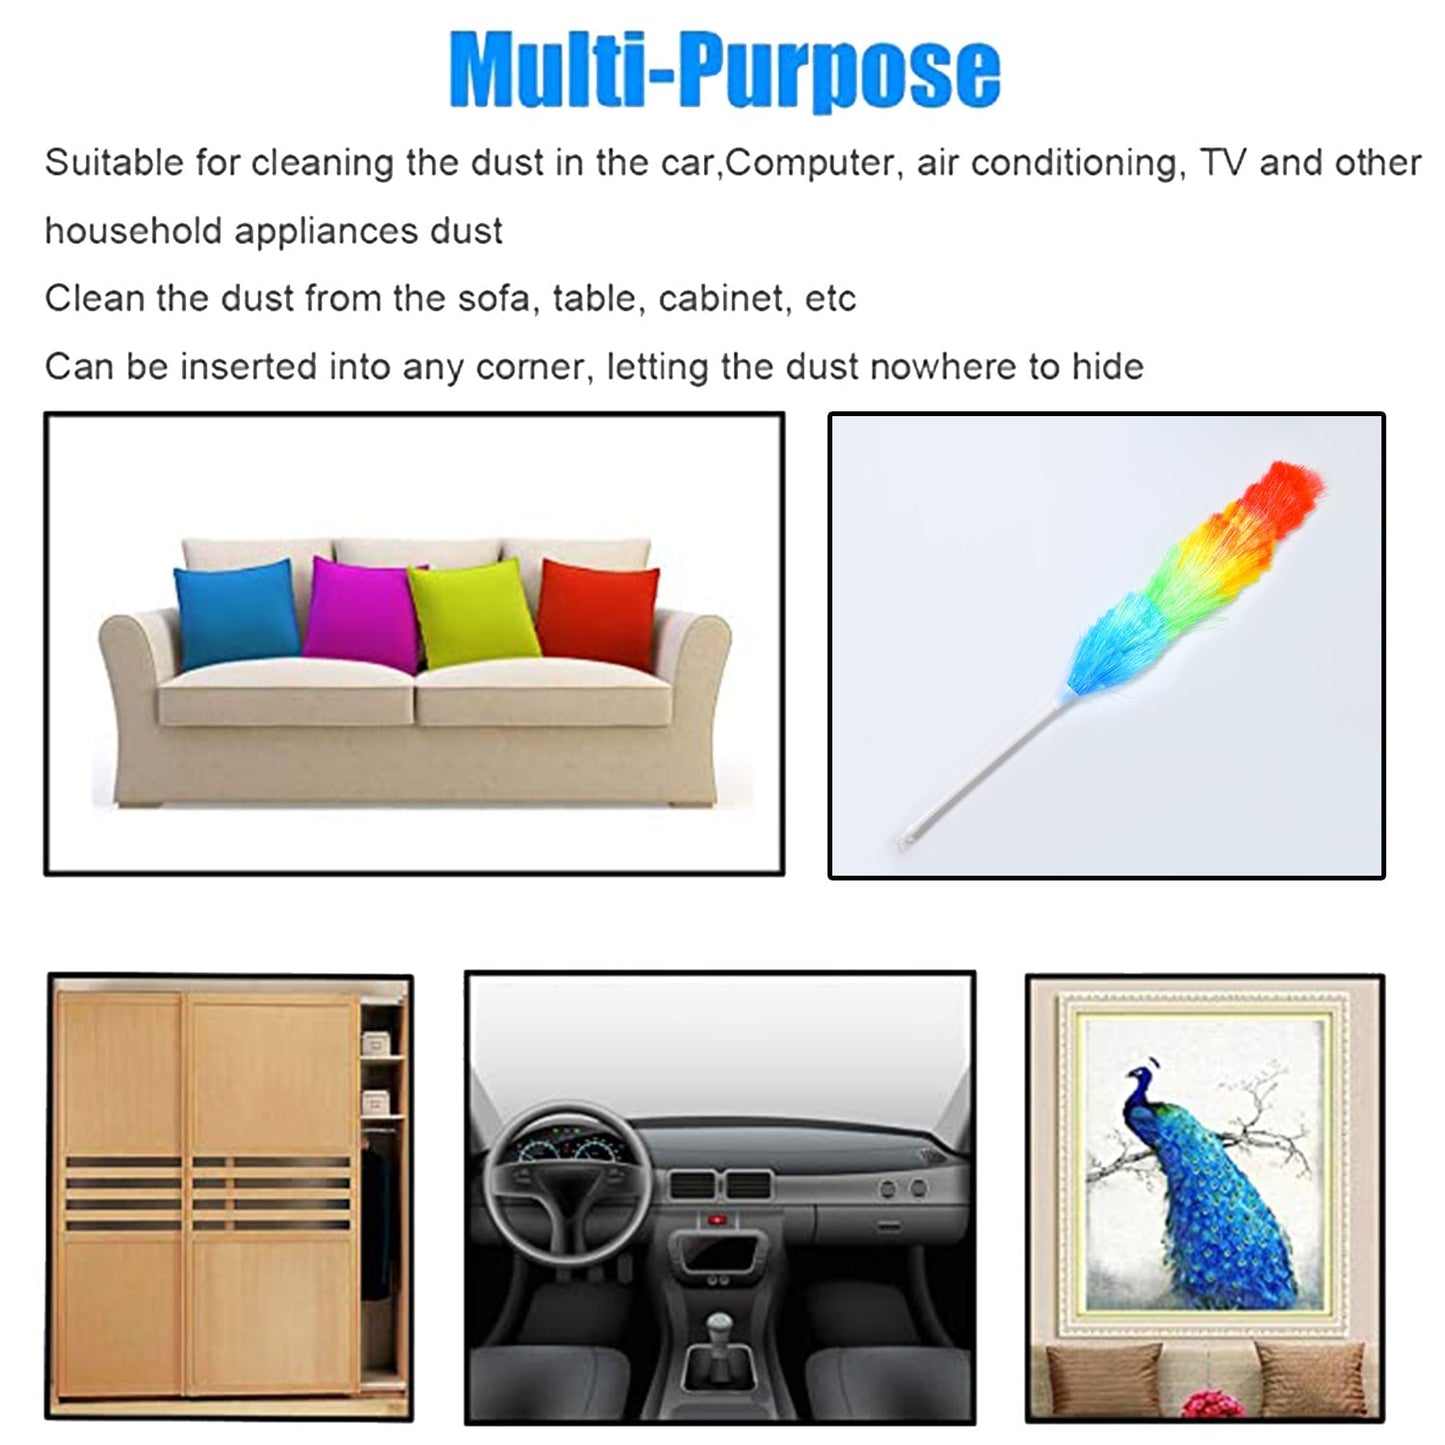 6321 Colorful Feather Duster | Microfiber Duster for Cleaning | Dusting Stick | Dusting Brush DeoDap